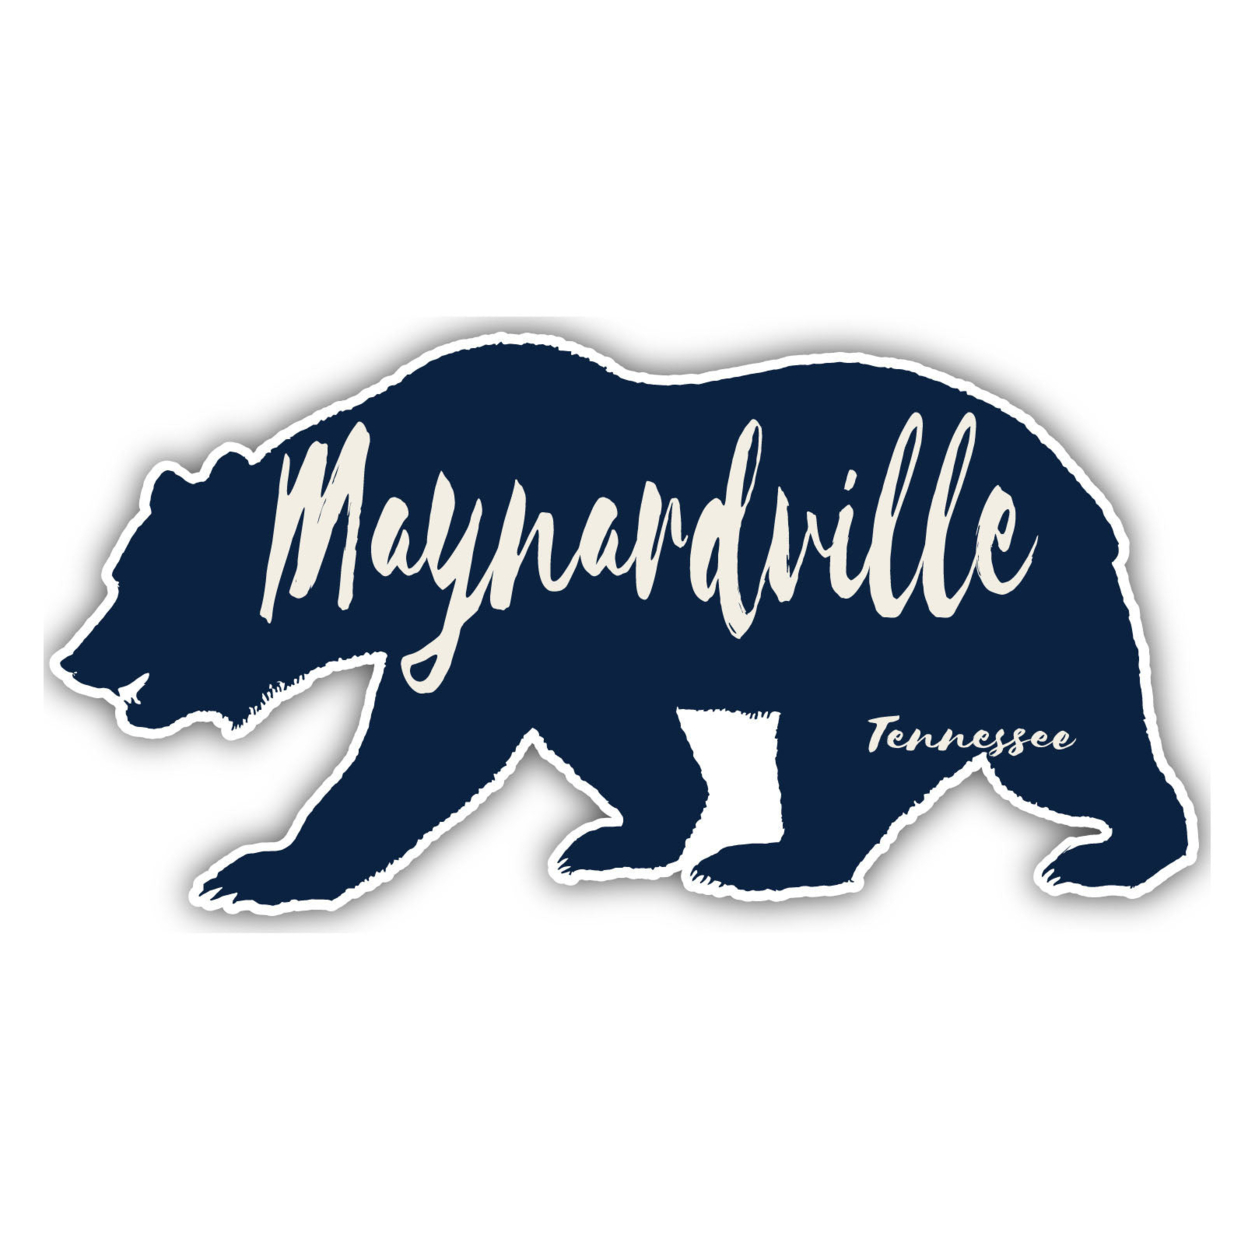 Maynardville Tennessee Souvenir Decorative Stickers (Choose Theme And Size) - 2-Inch, Great Outdoors